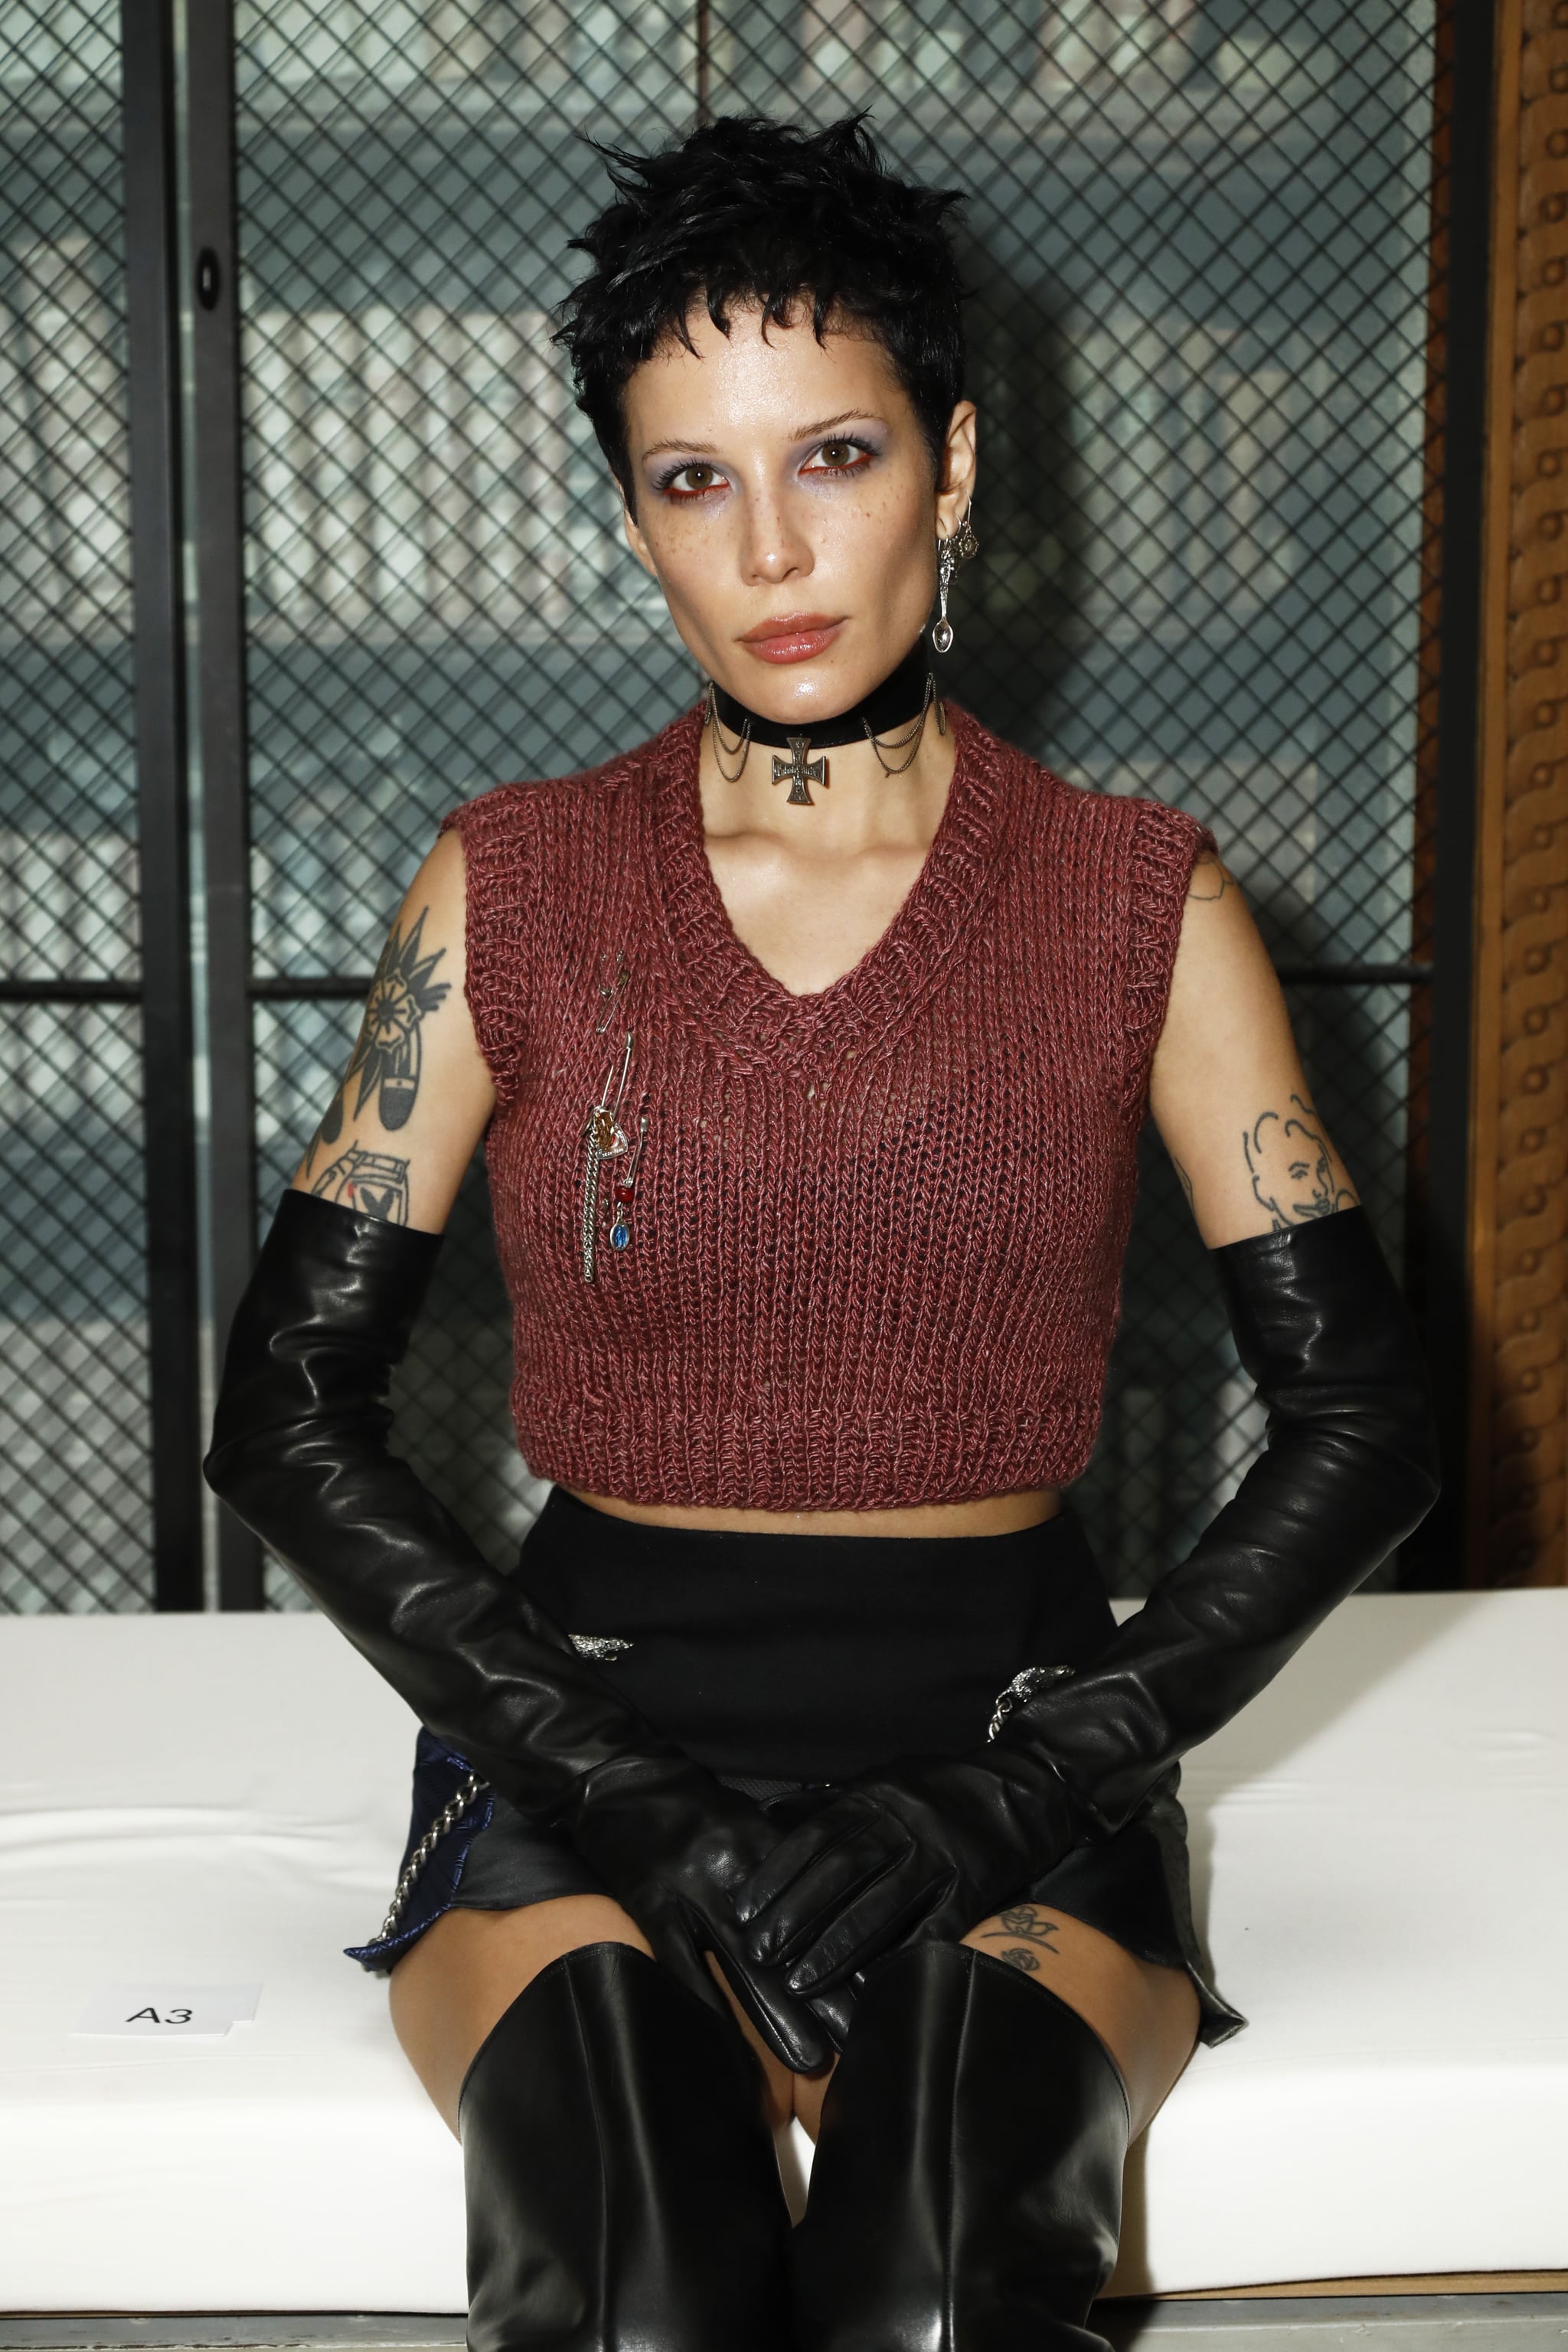 PARIS, FRANCE - OCTOBER 02: (EDITORIAL USE ONLY - For Non-Editorial use please seek approval from Fashion House) Halsey attends the Enfants Riches Deprimes Womenswear Spring/Summer 2023 show as part of Paris Fashion Week on October 02, 2022 in Paris, France. (Photo by Julien Hekimian/Getty Images)